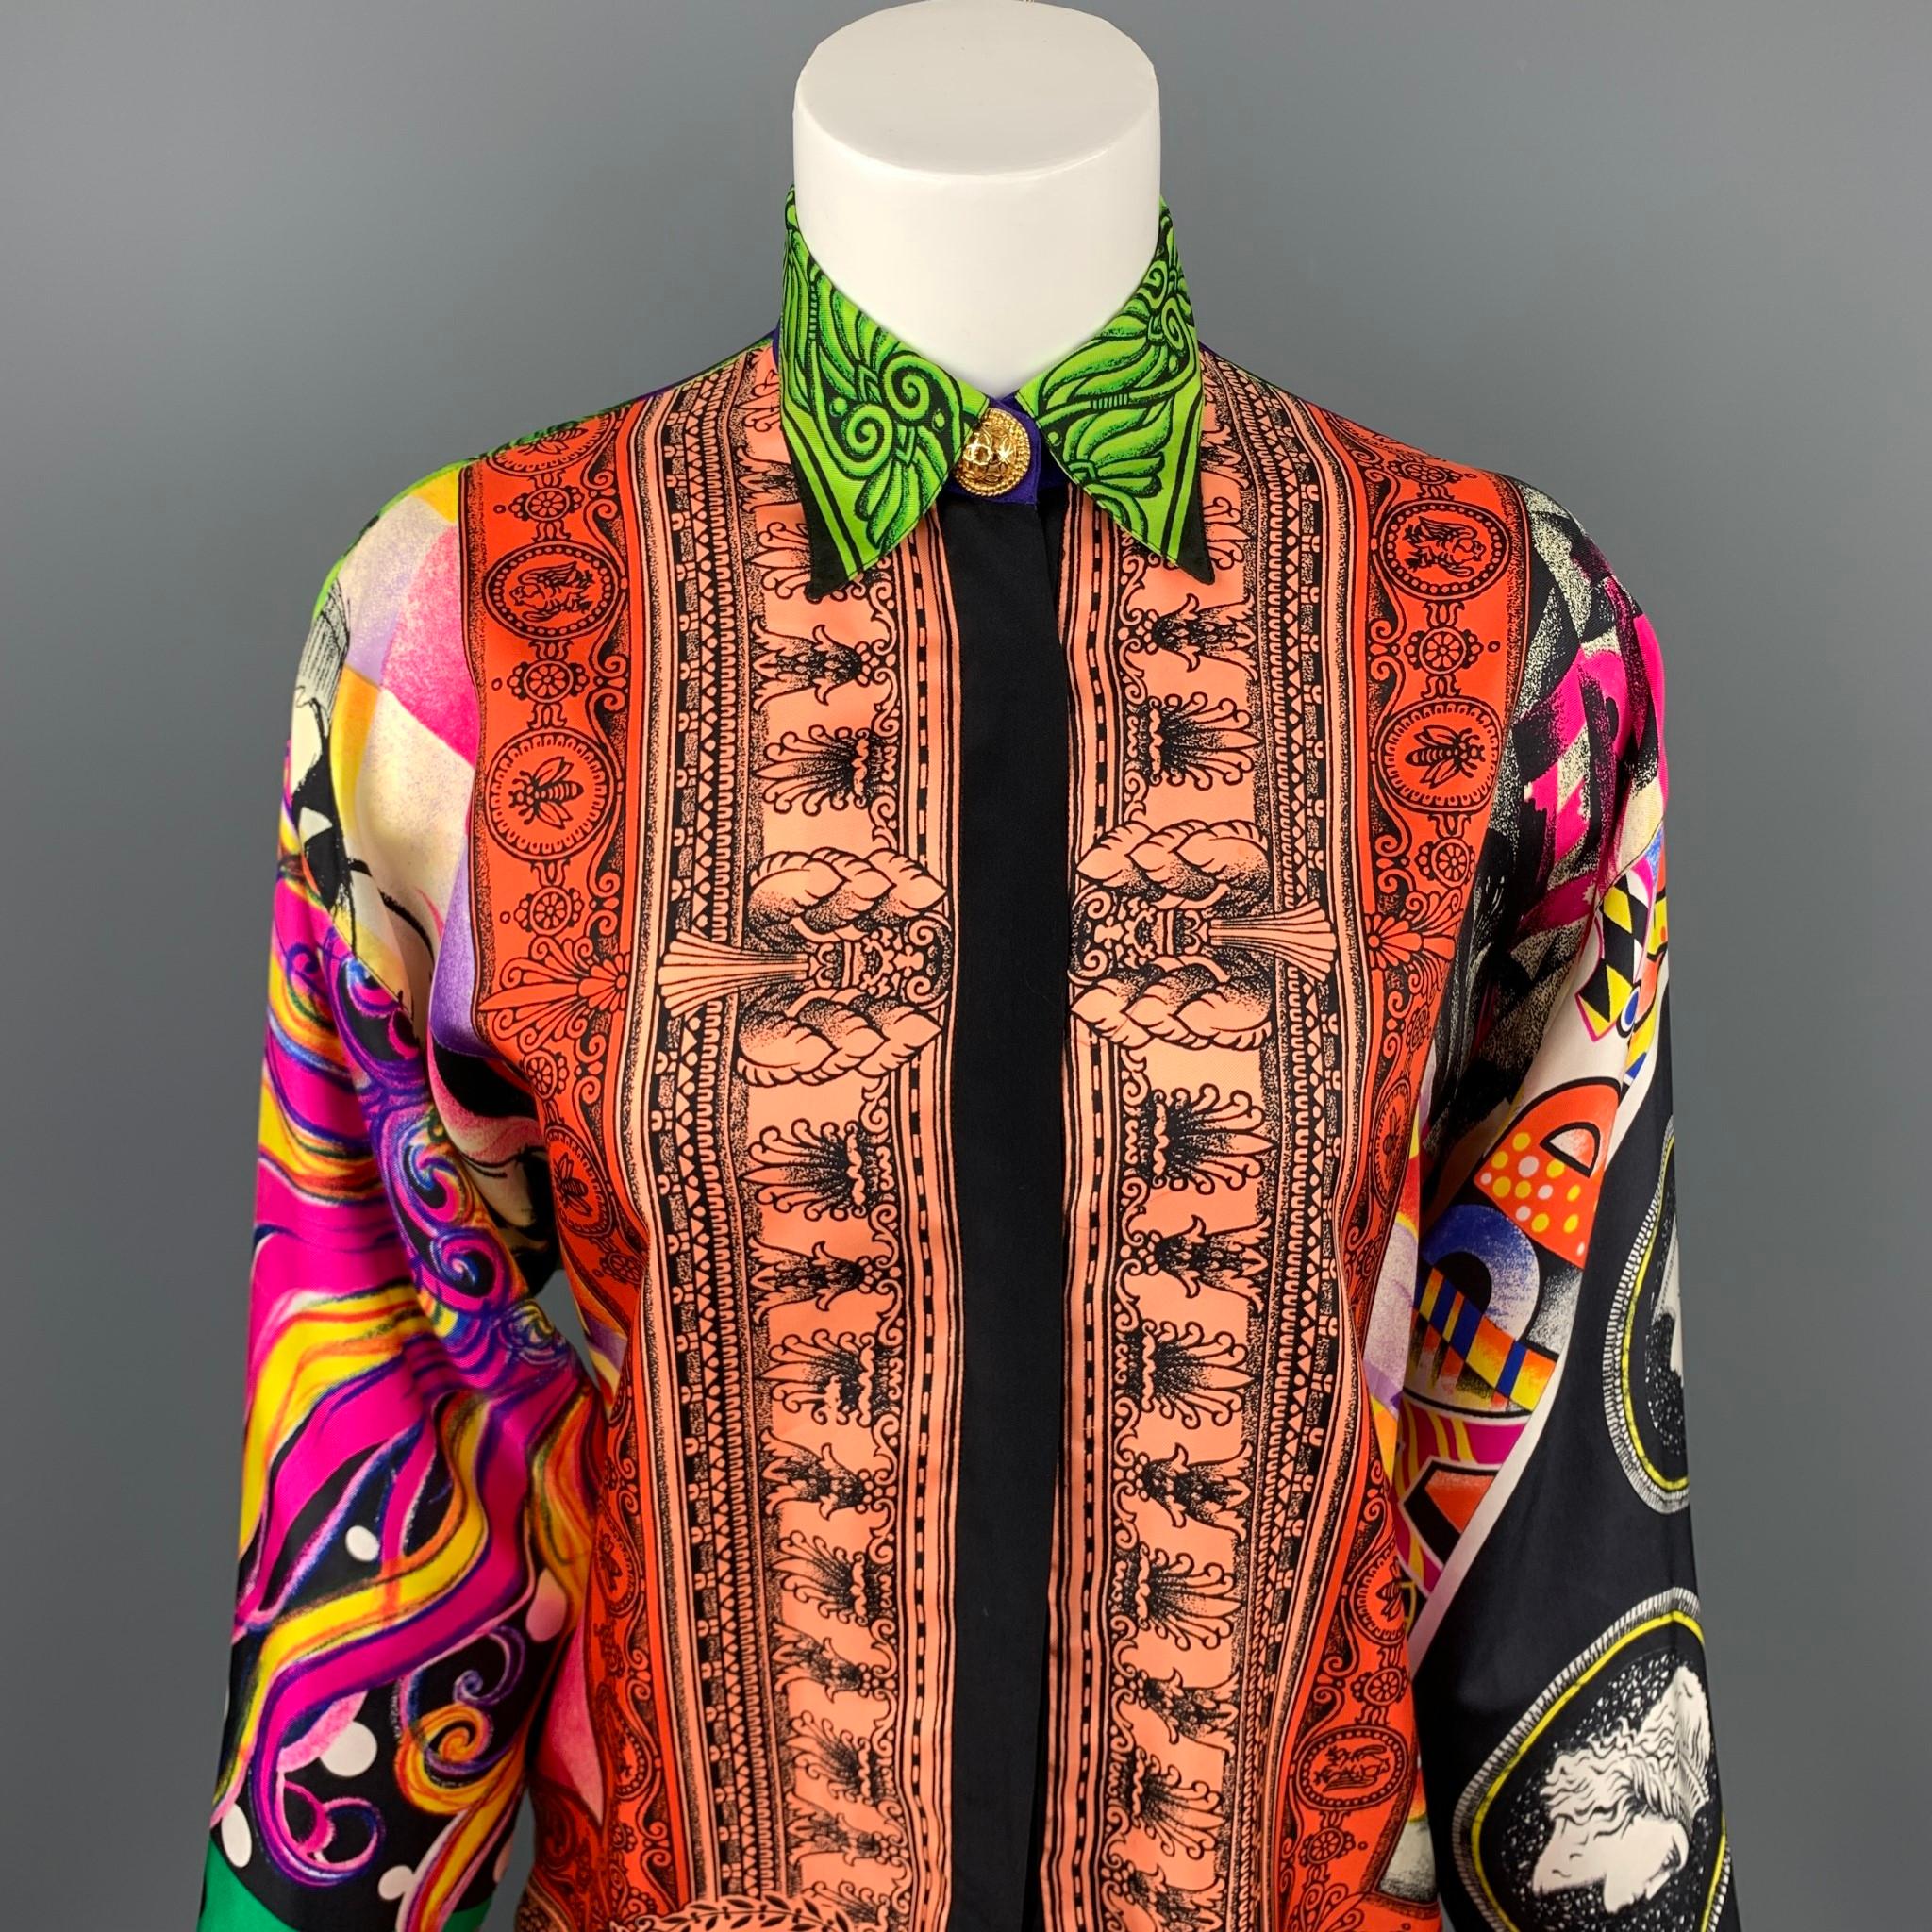 Vintage GIANNI VERSACE blouse comes in a multi-color baroque silk featuring gold button details, spread collar, and a hidden button closure. Minor discoloration. Made in Italy.

Very Good Pre-Owned Condition.
Marked: IT 38

Measurements:

Shoulder: